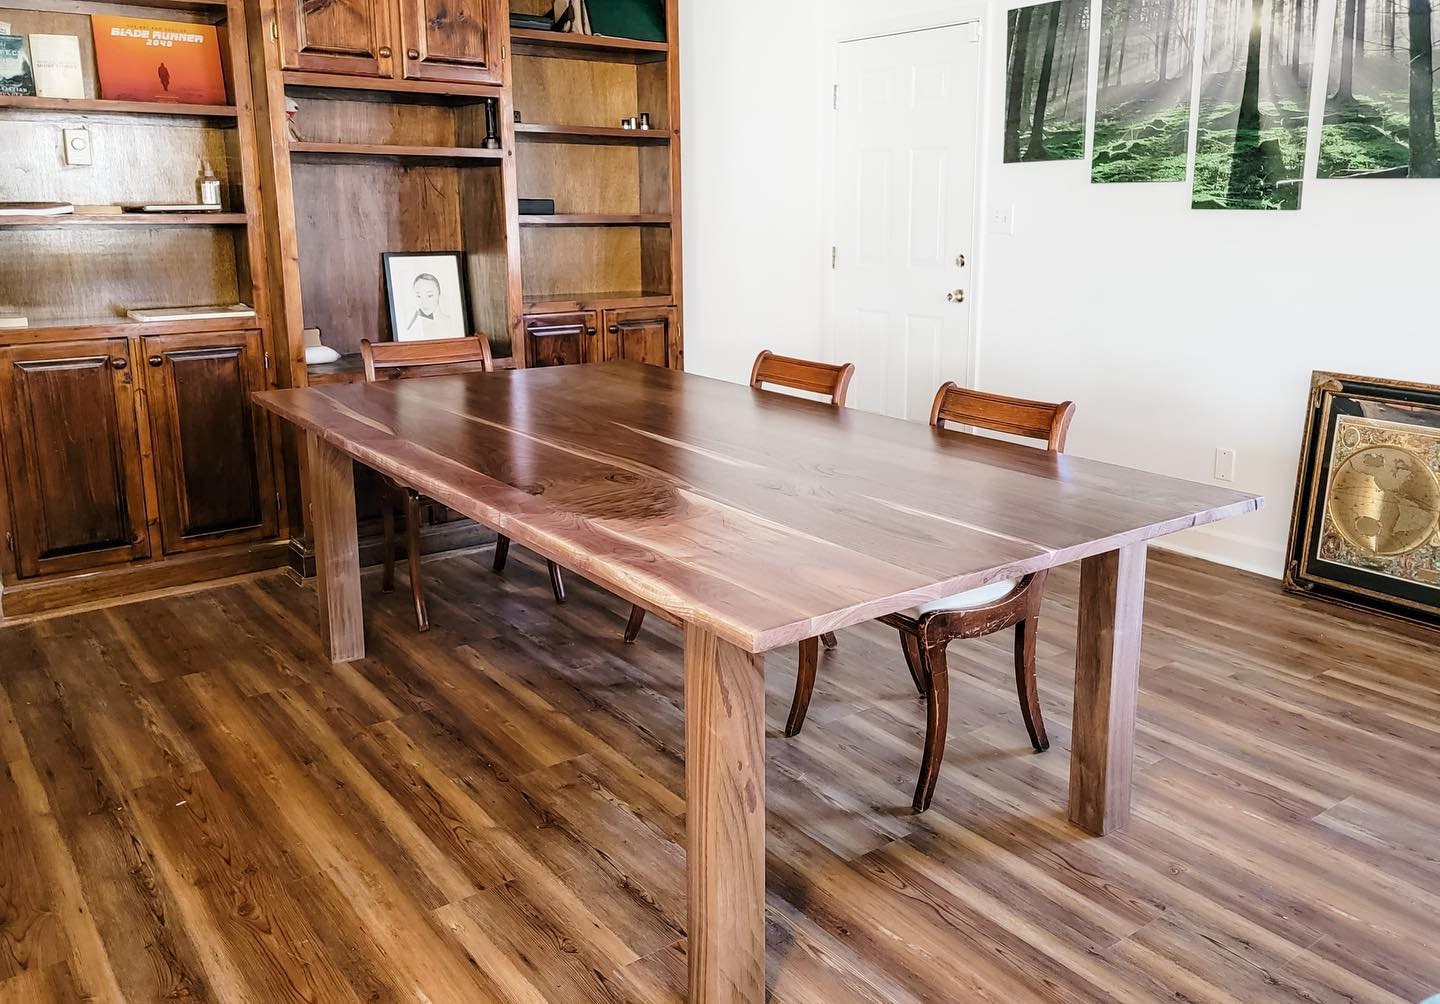 Natural Walnut Dining Table, Large Walnut Farmhouse Table, Solid Walnut Table, Black Walnut Table, Hardwood Kitchen Table - All Sizes!